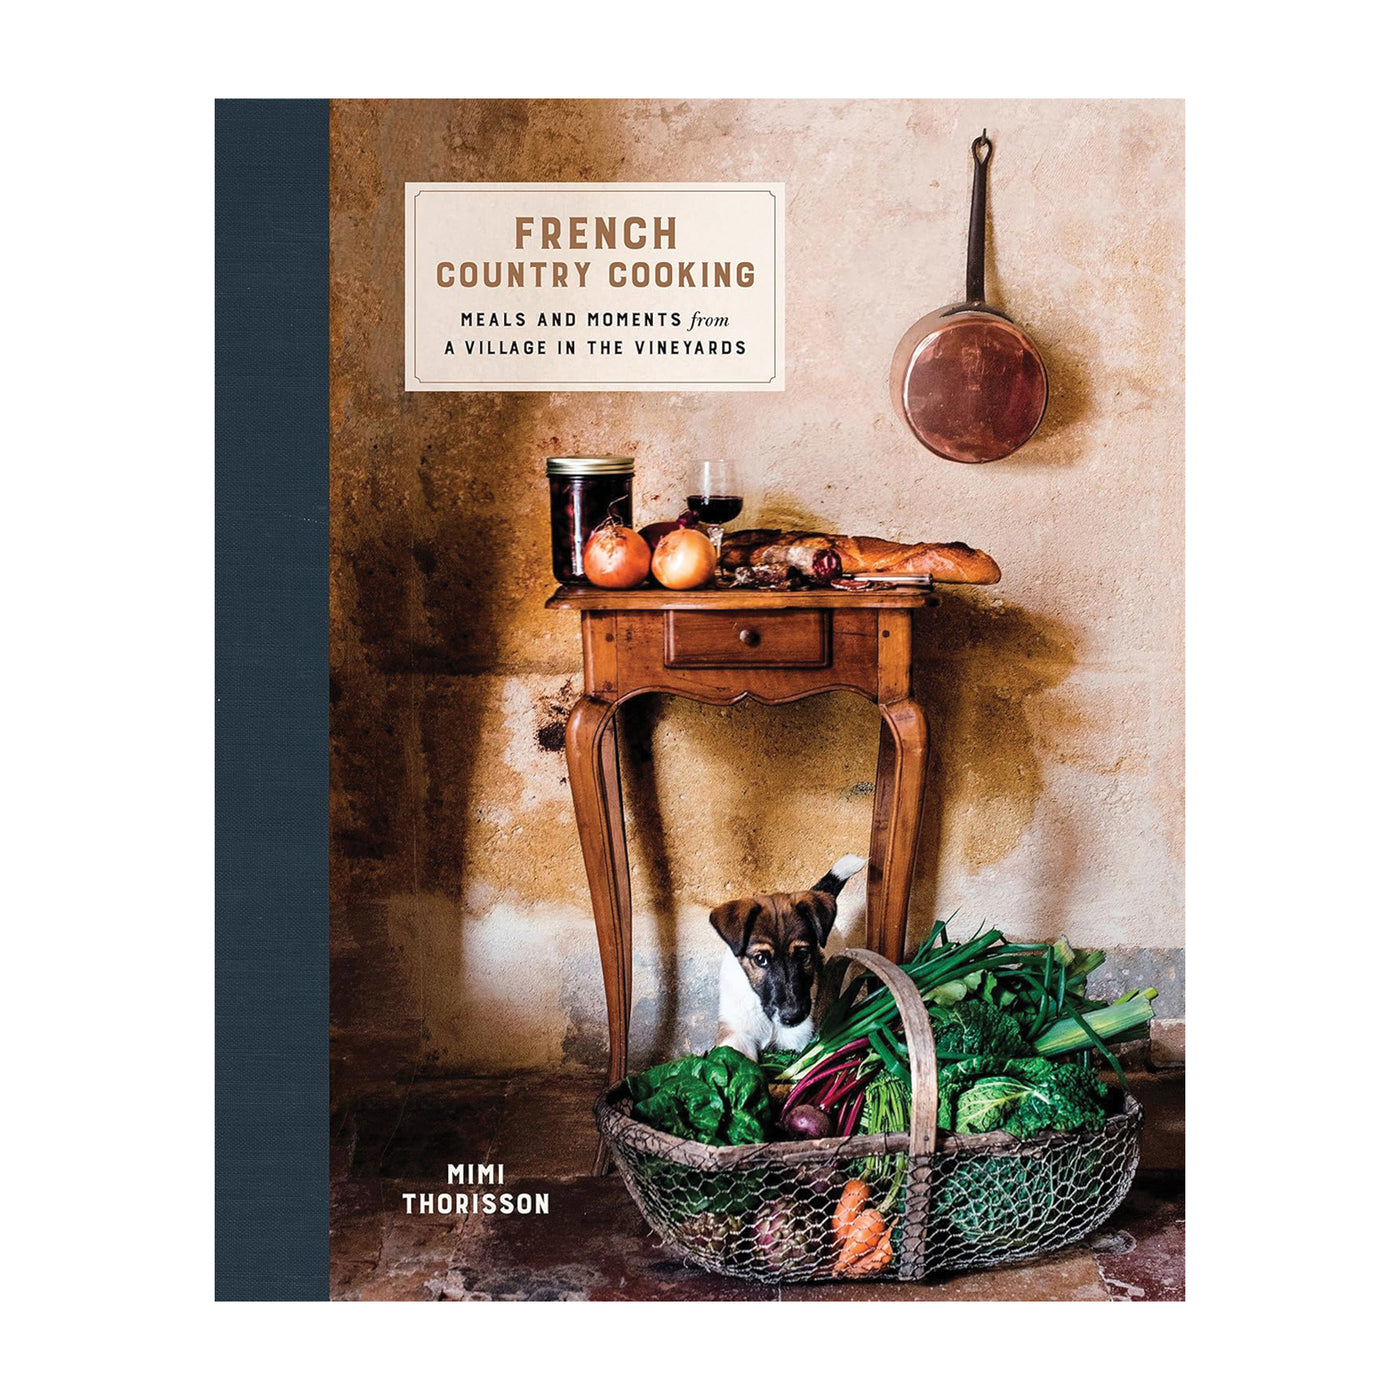 Mimi Thorisson | French Country Cooking: Meals and Moments from a Village in the Vineyards: A Cookbook